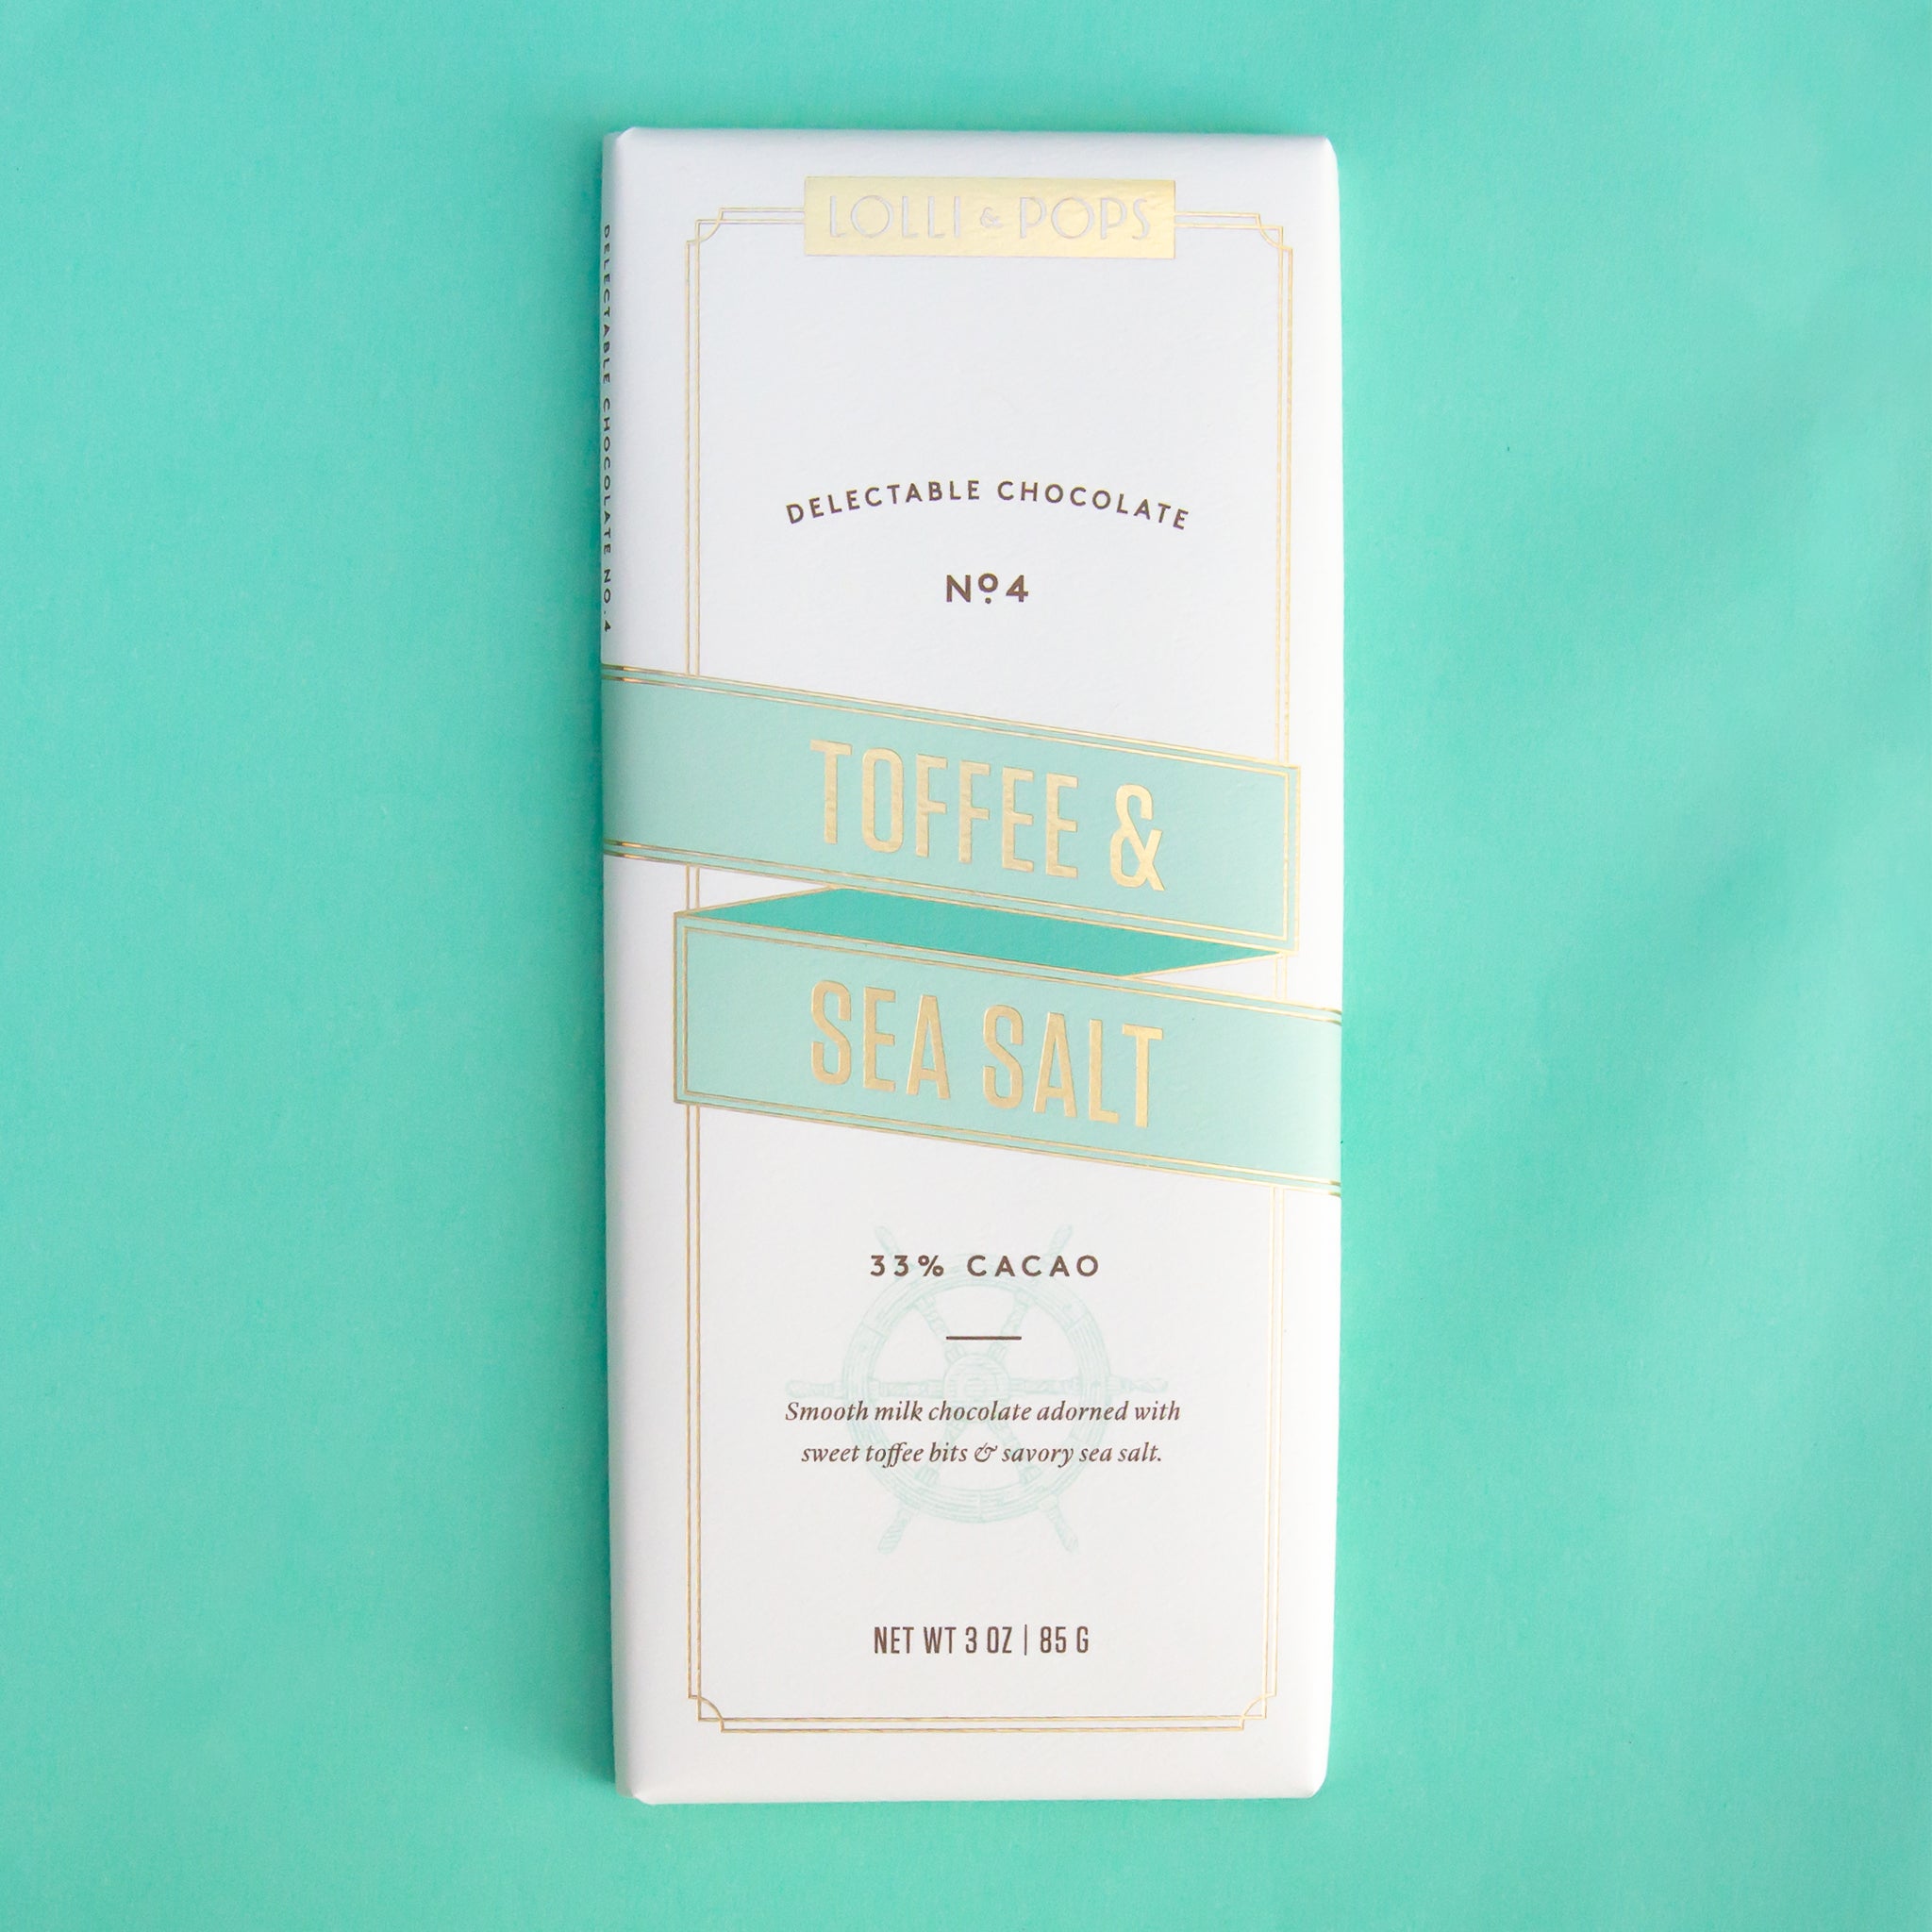 On a teal background is a neutral colored package of a chocolate bar with toffee and sea salt.